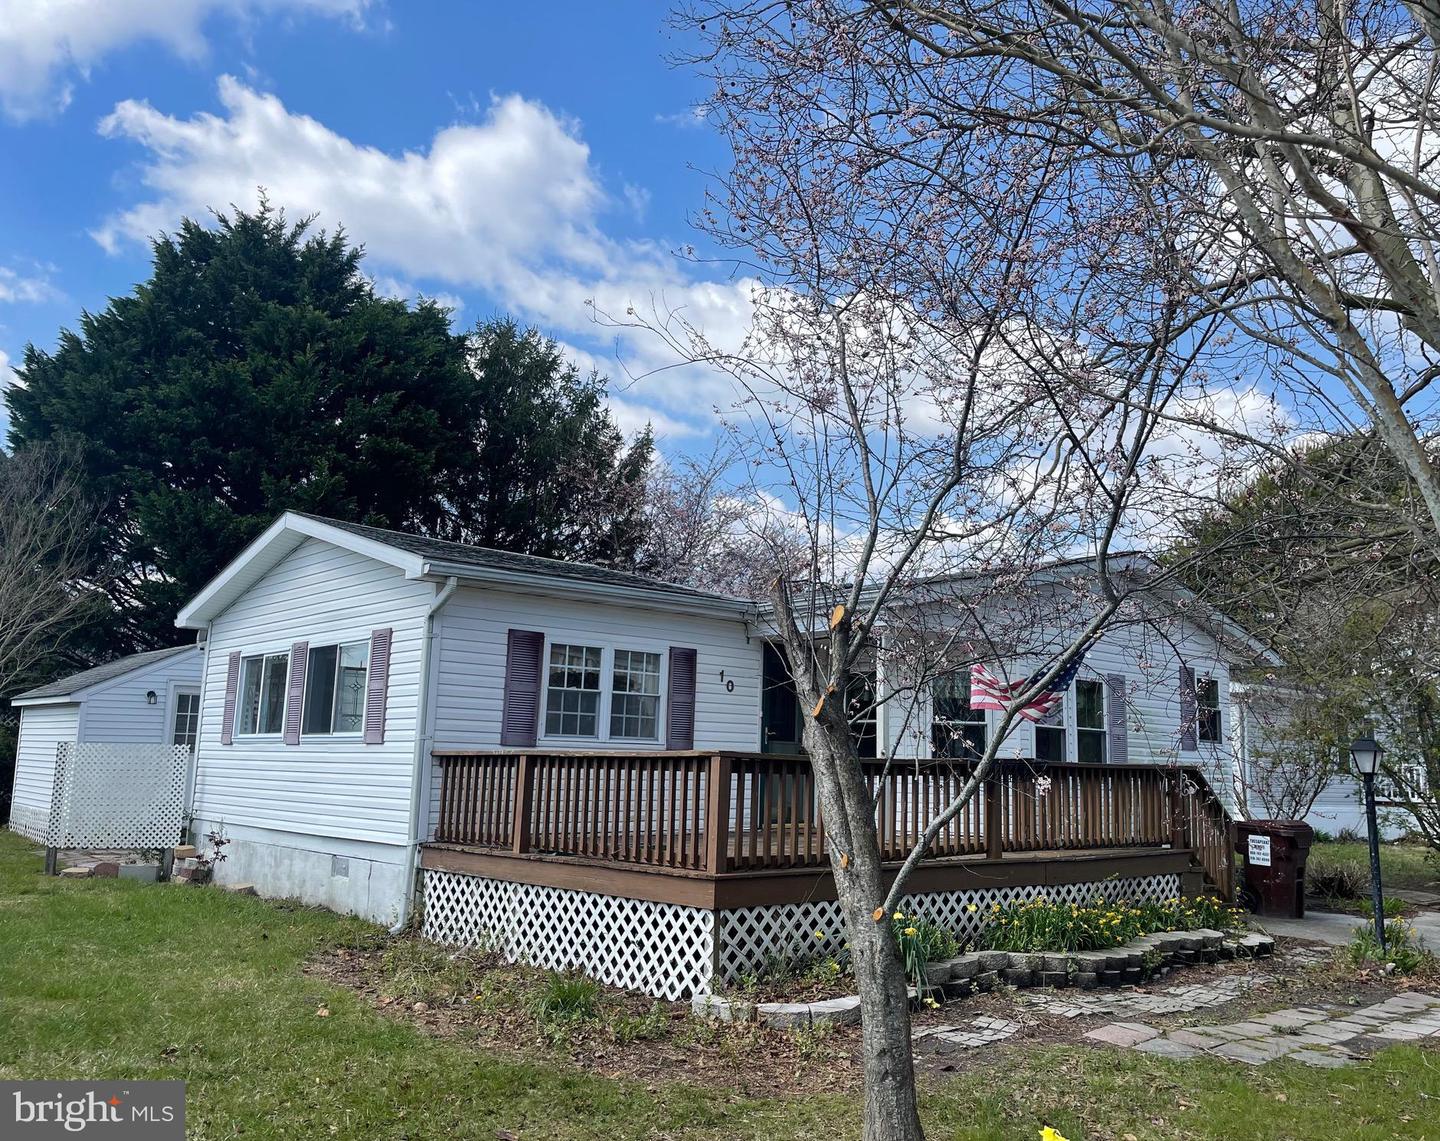 MDWO2019962-802957785314-2024-03-29-19-05-25 10 Ensign Dr | Berlin, MD Real Estate For Sale | MLS# Mdwo2019962  - 1st Choice Properties